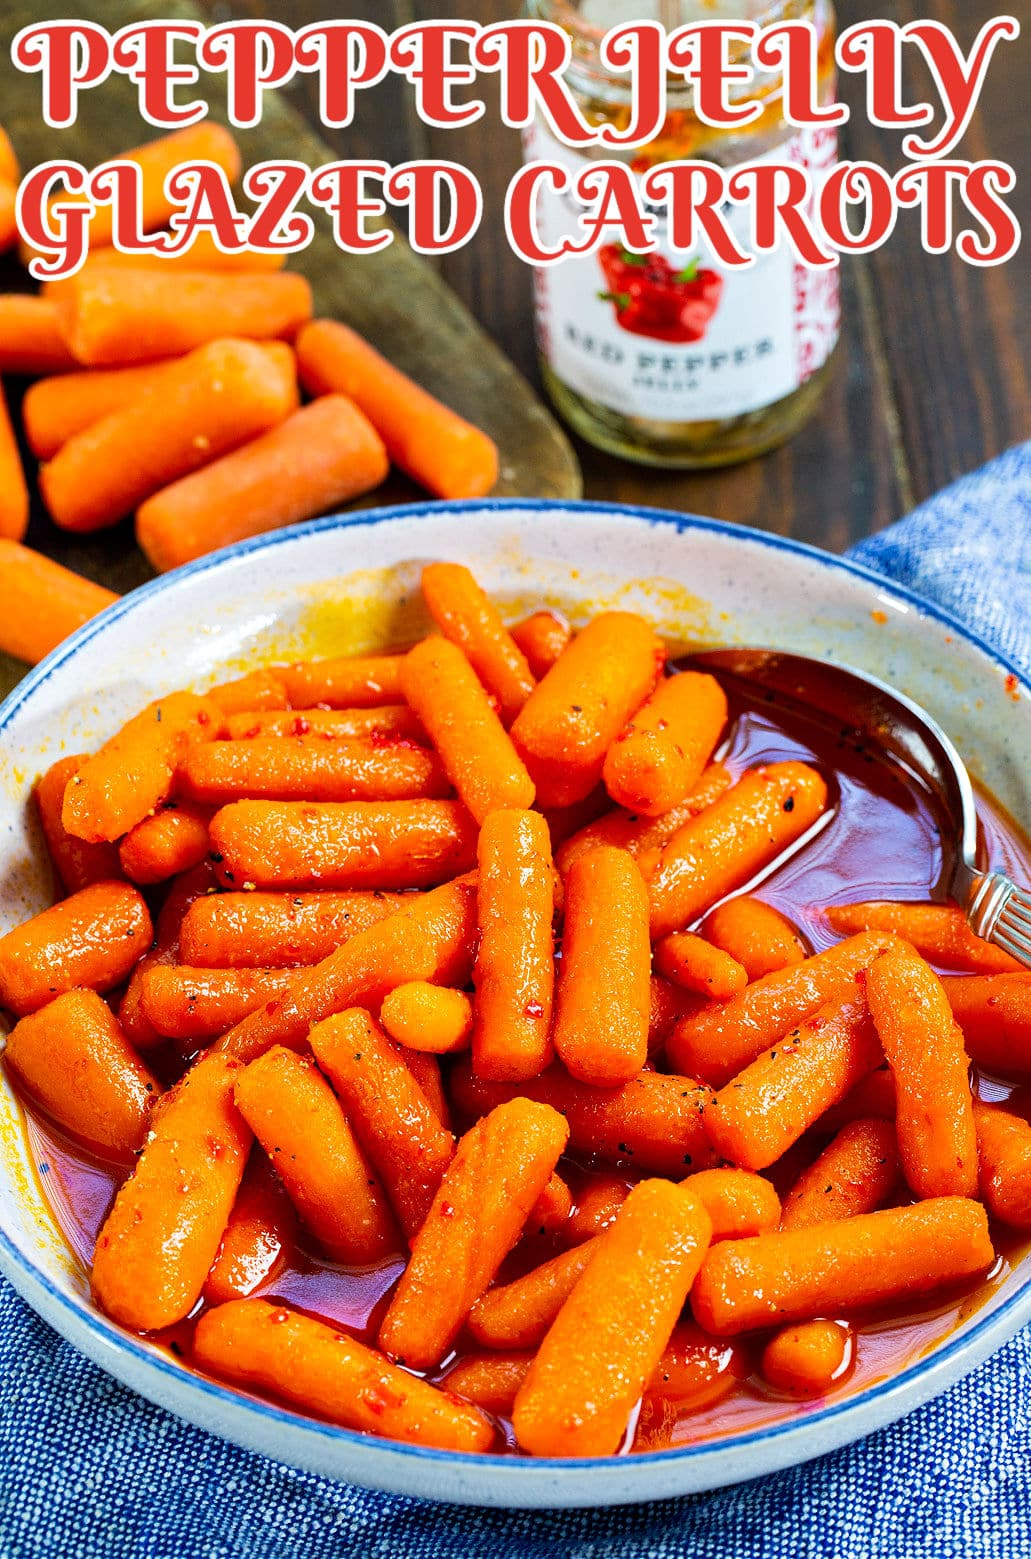 Pepper Jelly Glazed Carrots in bowl and jar of pepper jelly.